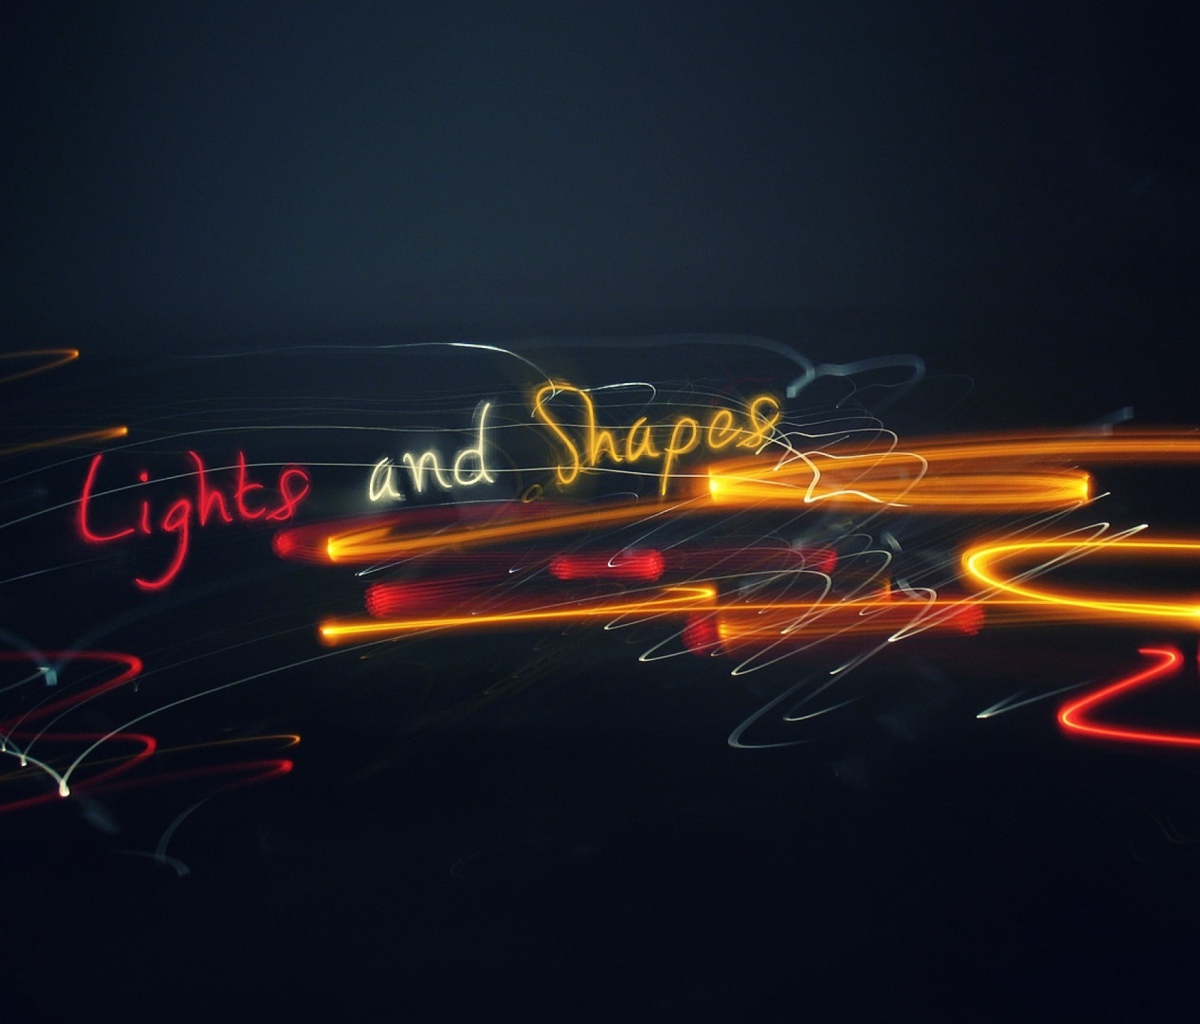 Lights And Shapes wallpaper 1200x1024